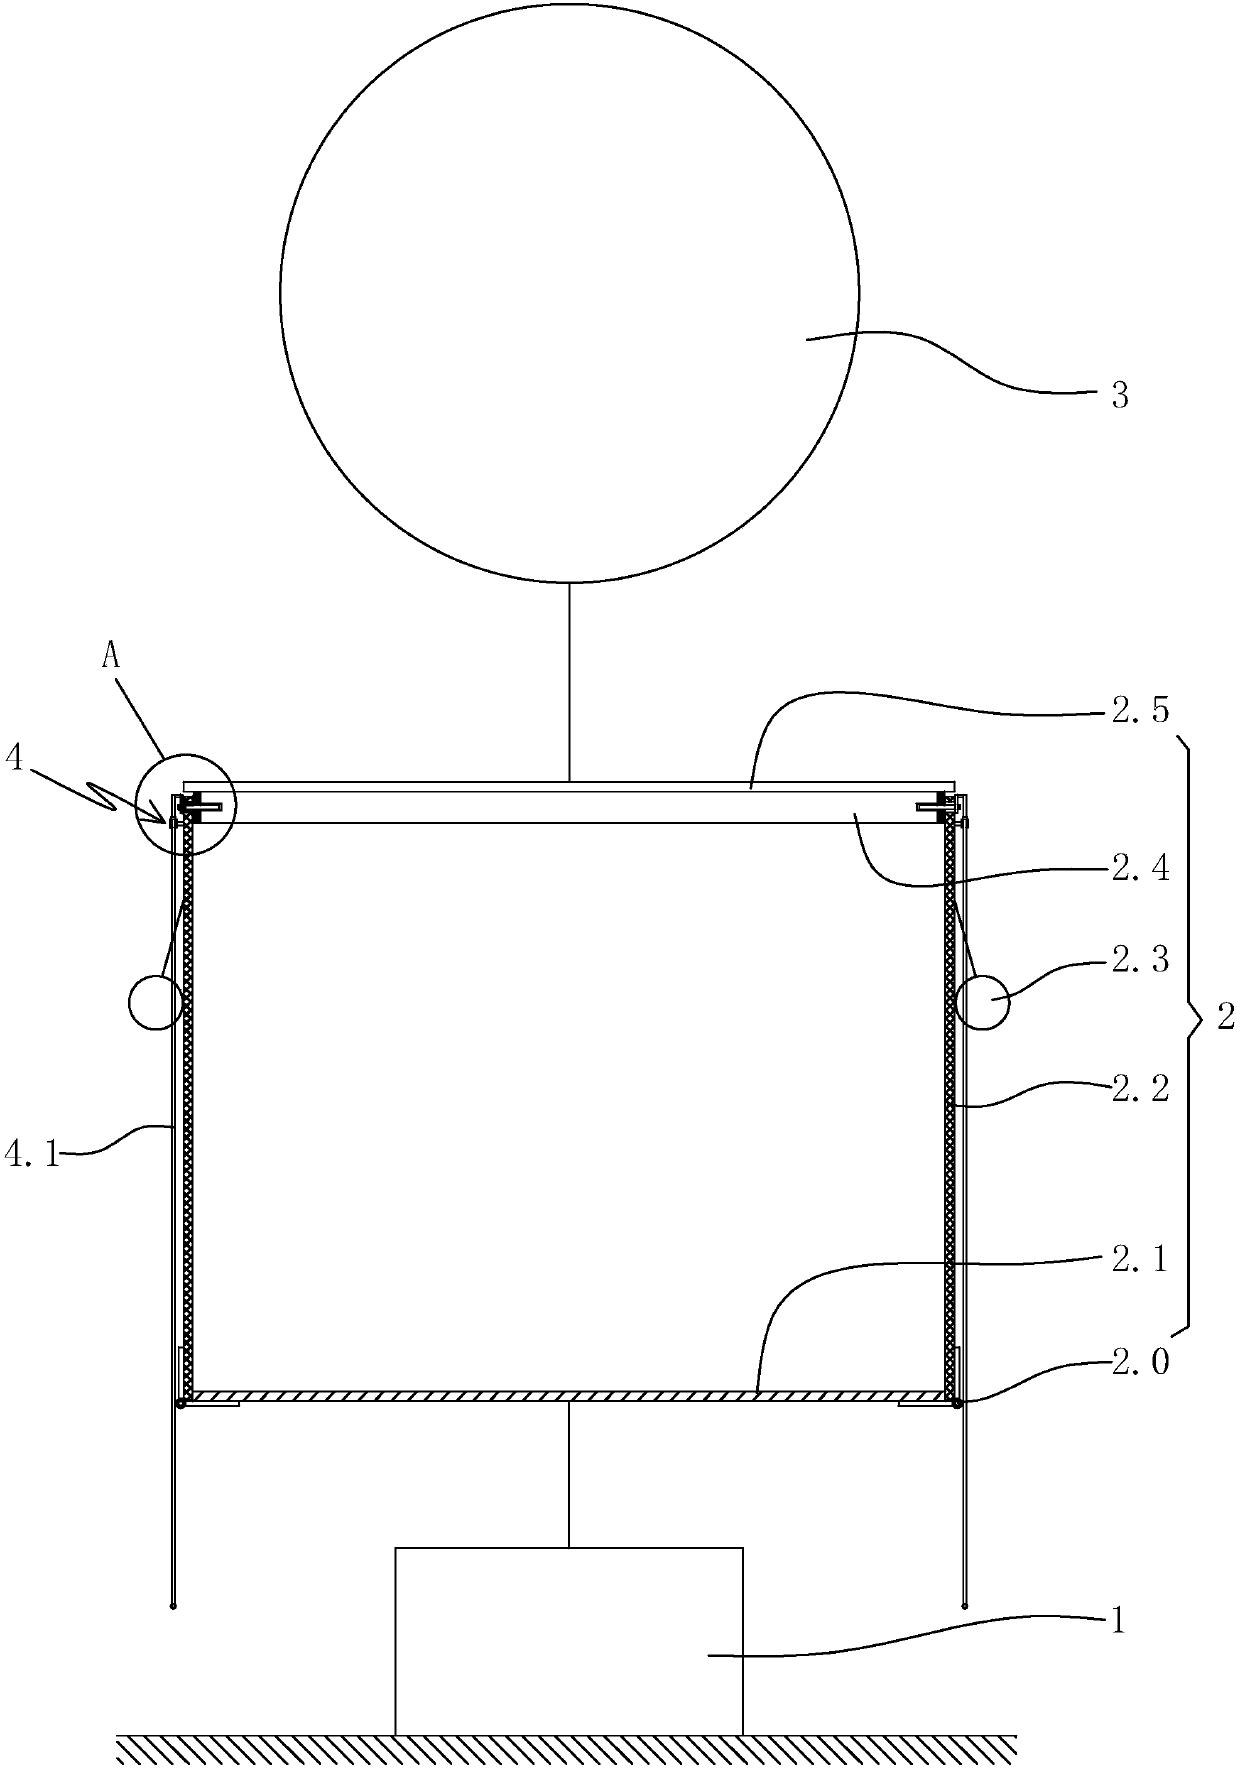 Settling artificial releasing device